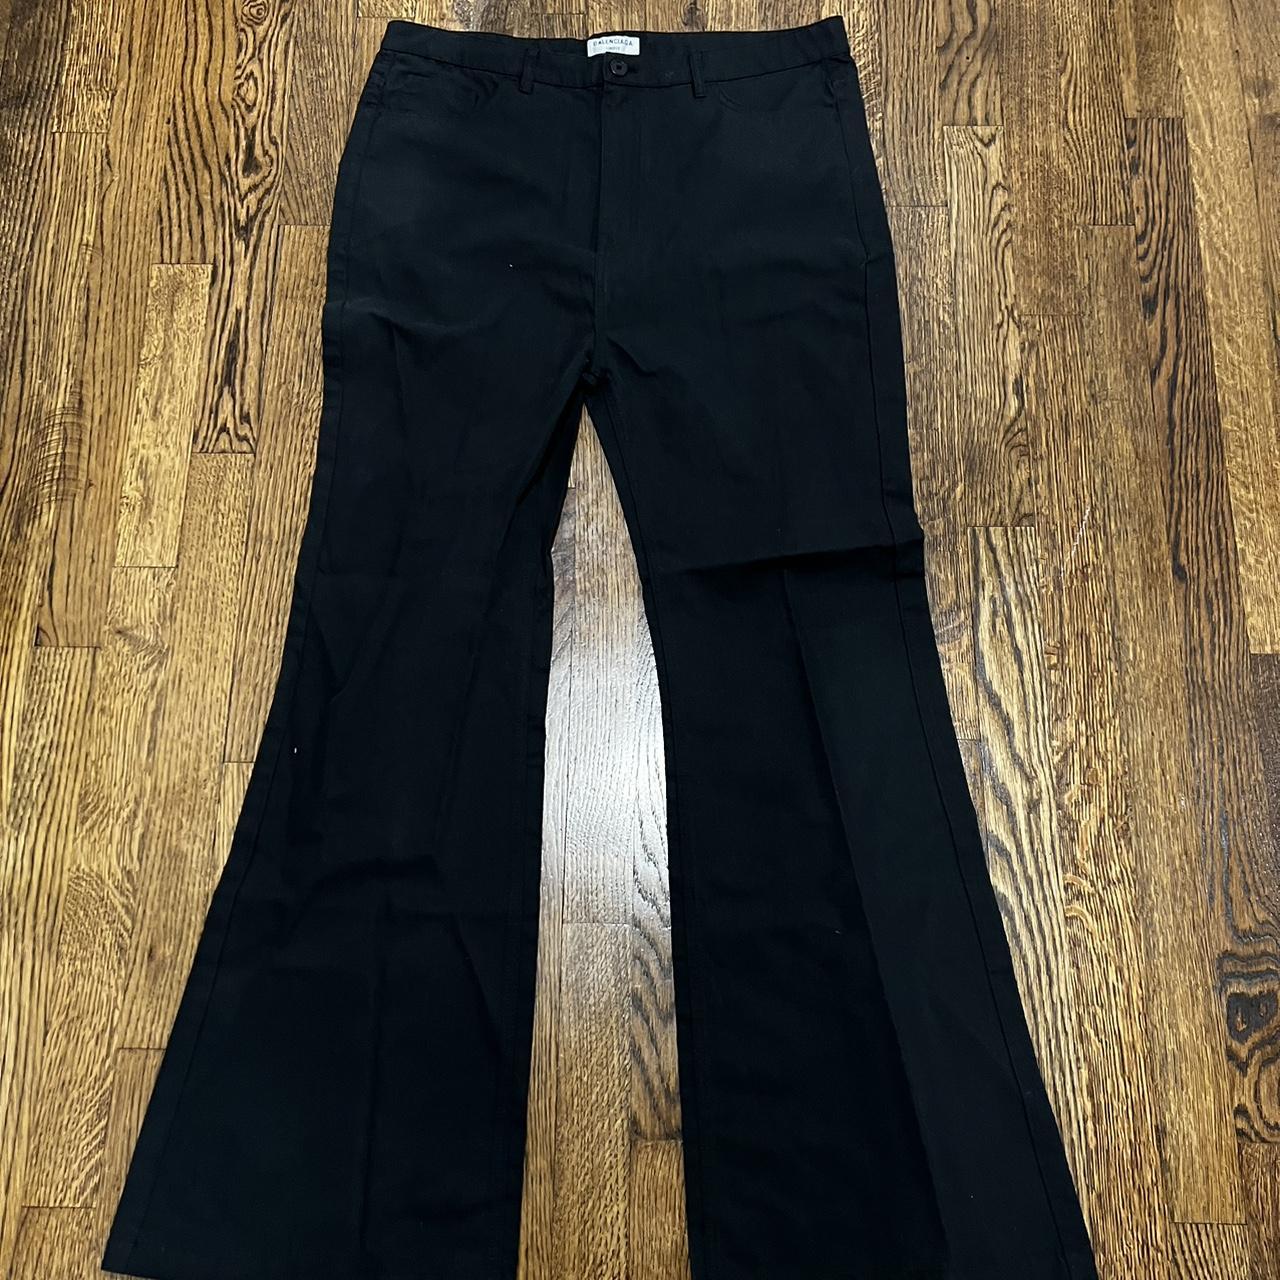 Balenciaga fw22 flared jeans 10/10 condition fit... - Depop